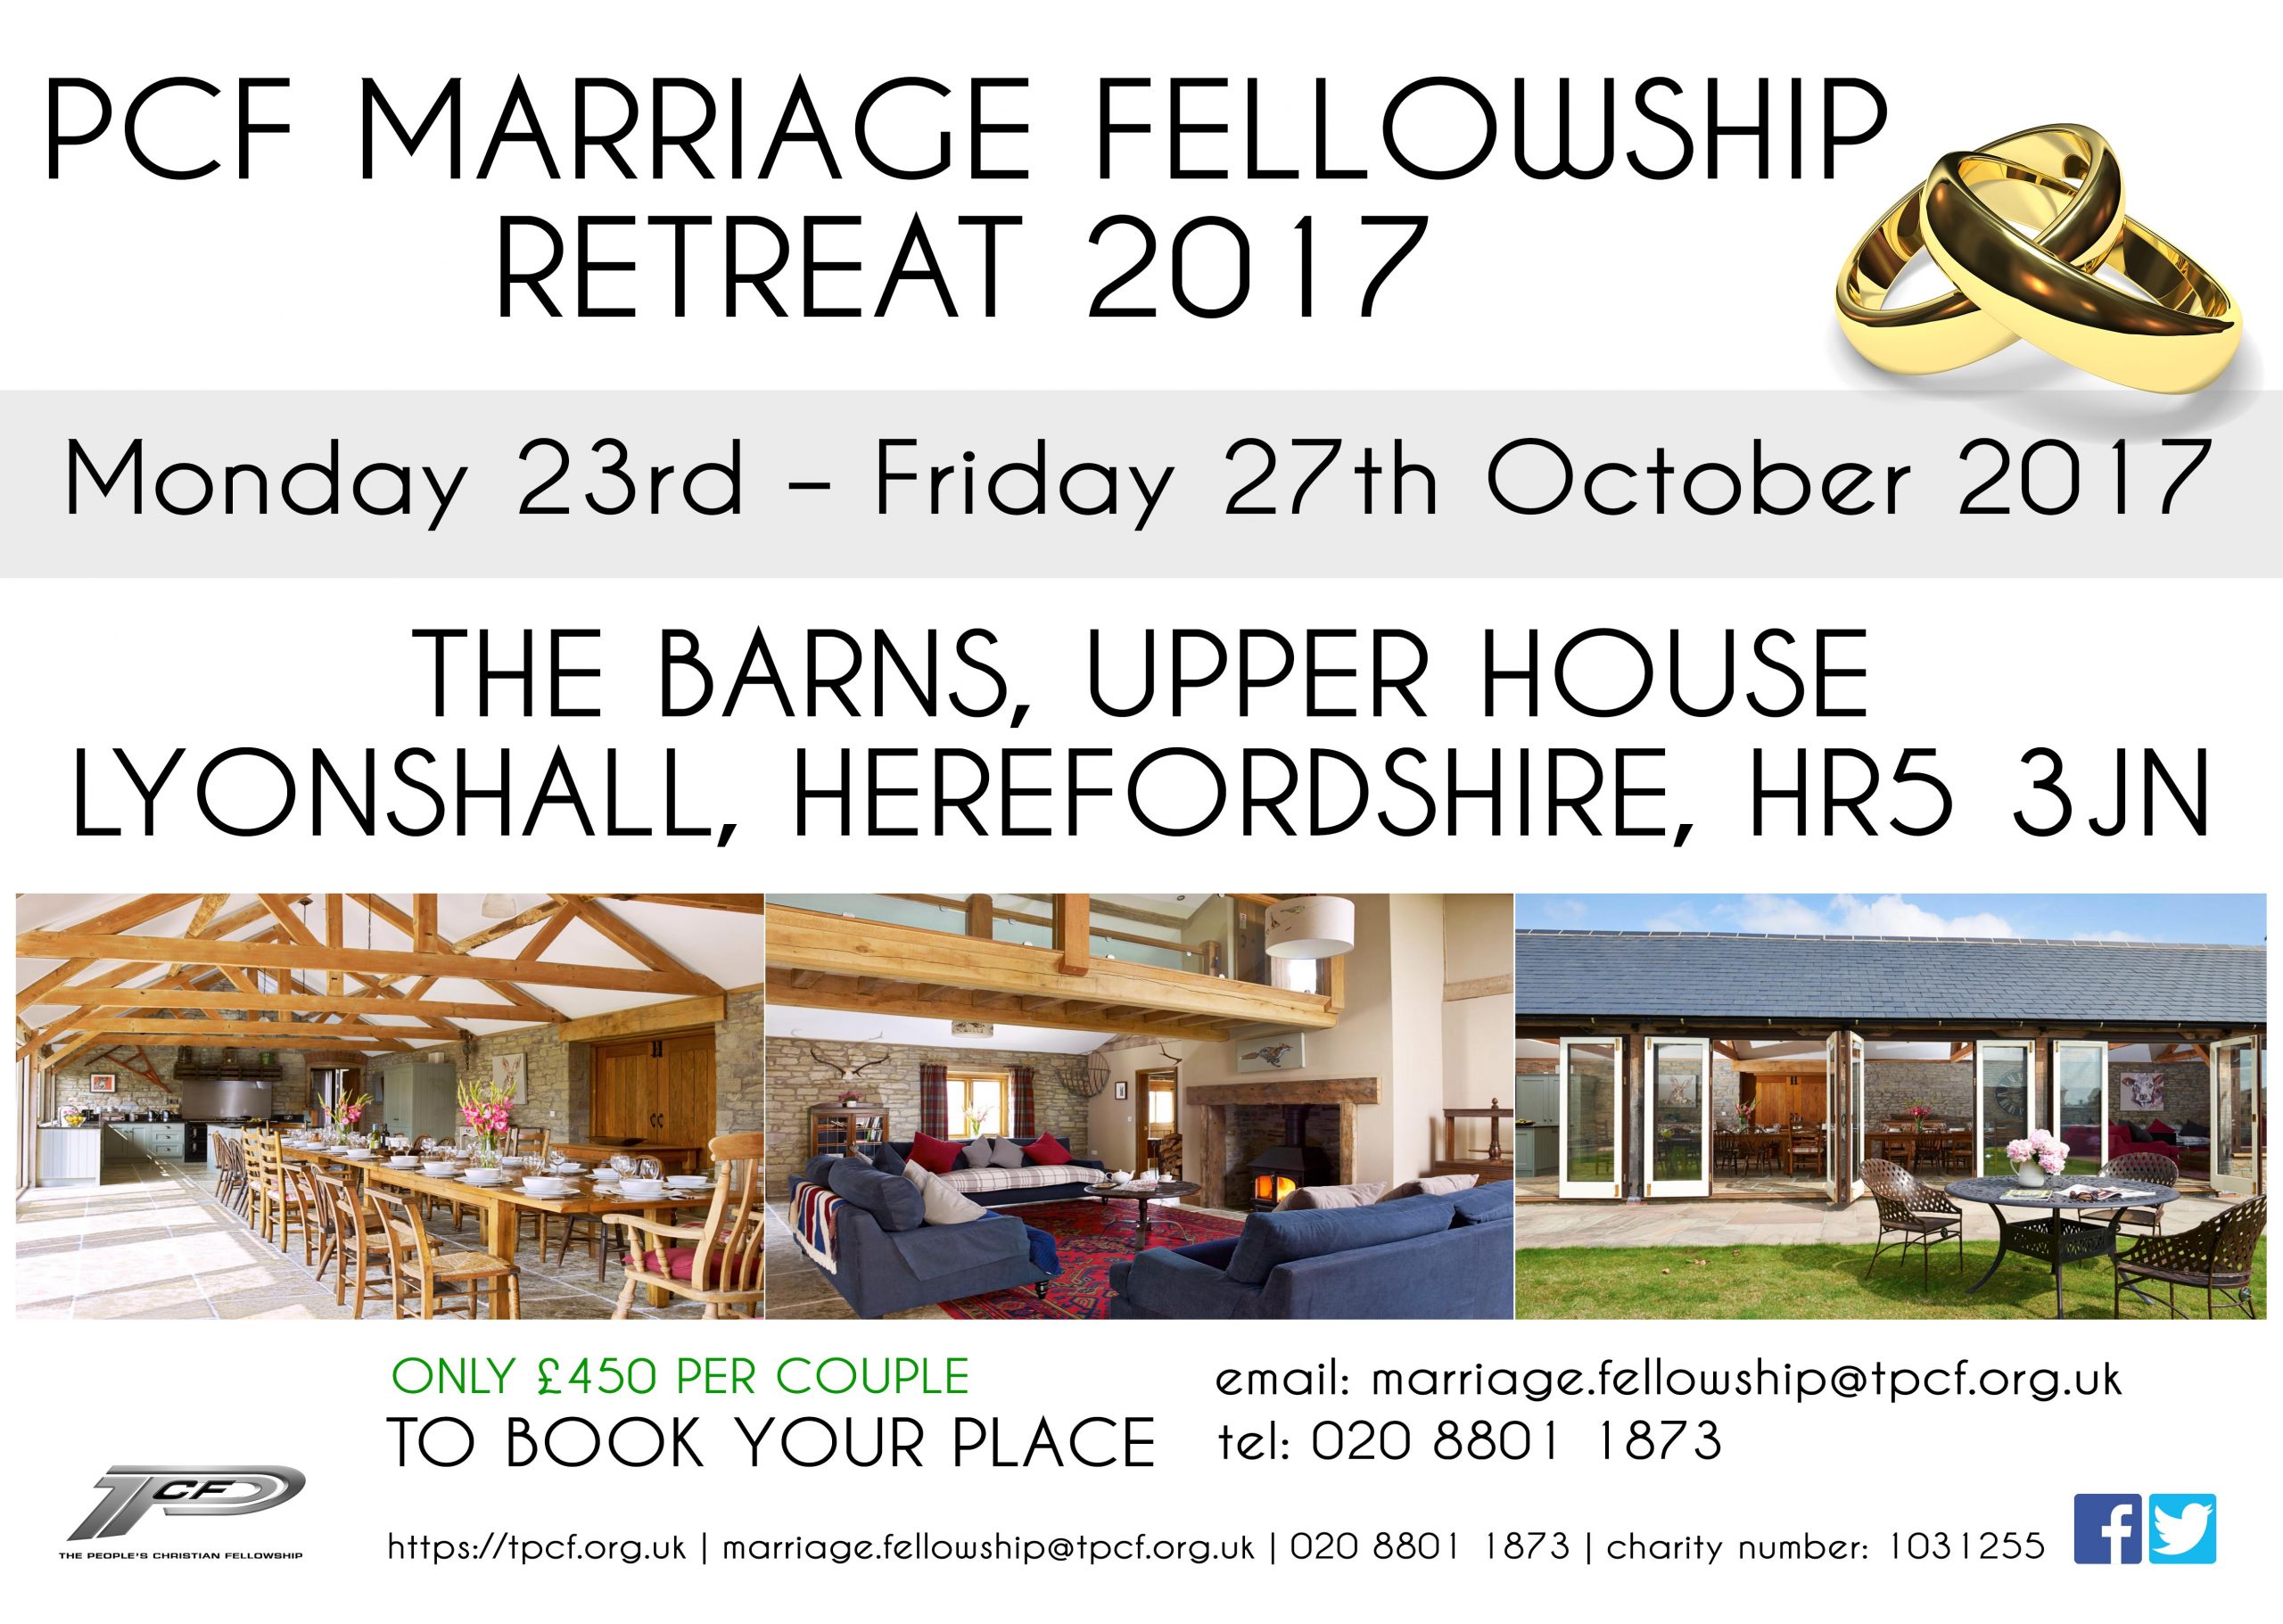 PCF MARRIAGE FELLOWSHIP RETREAT 2017 to PCF